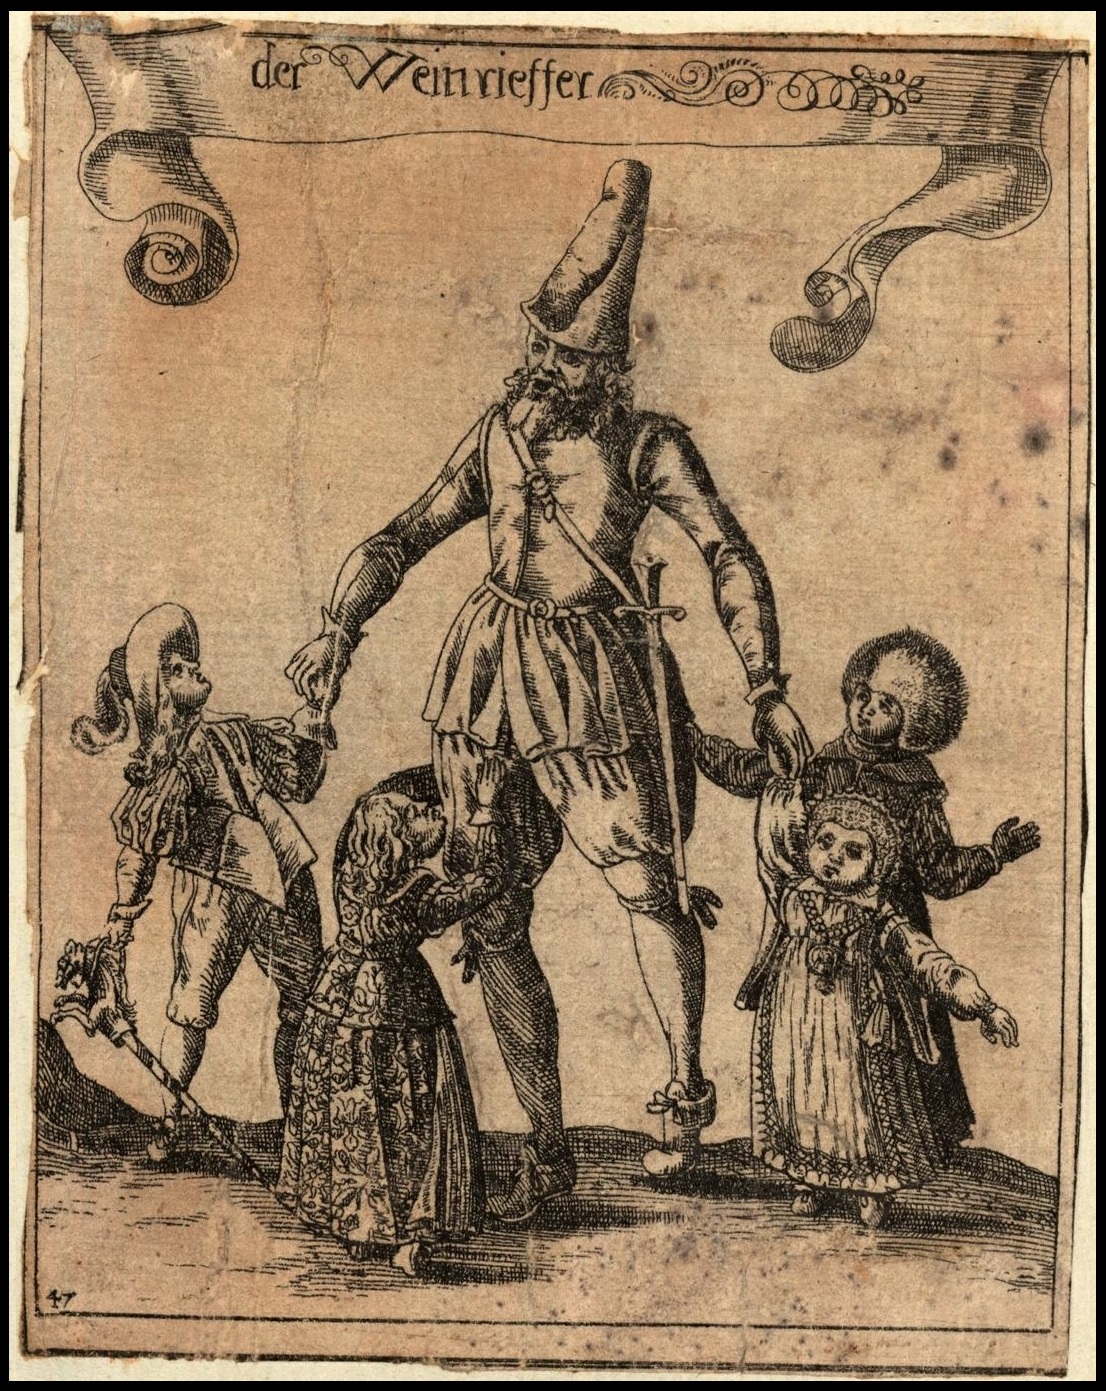 an illustration of an old man standing next to people